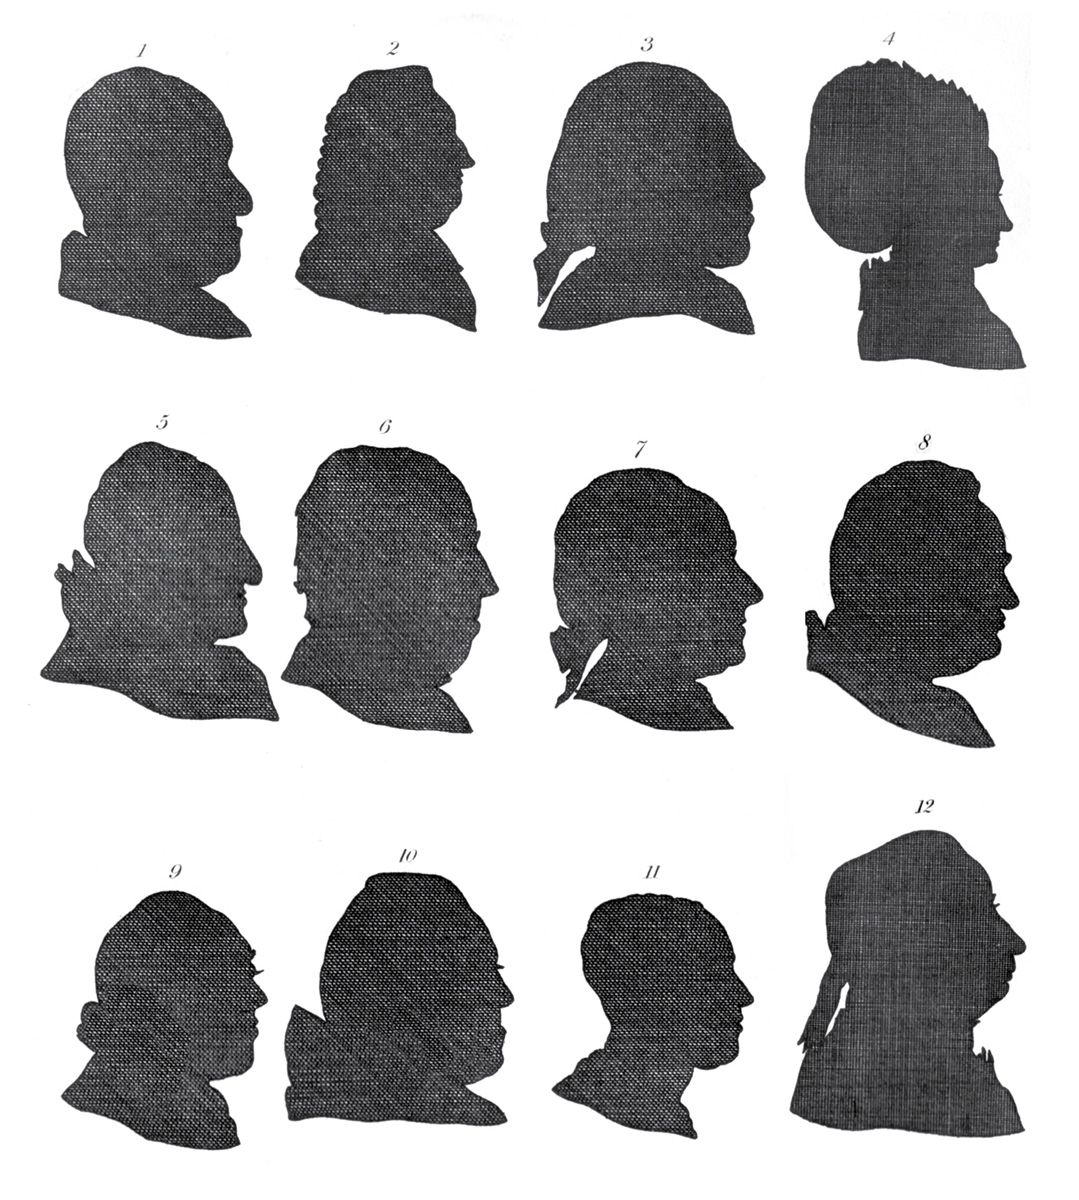 A page of profiles from Lavater’s Essays on Physiognomy.